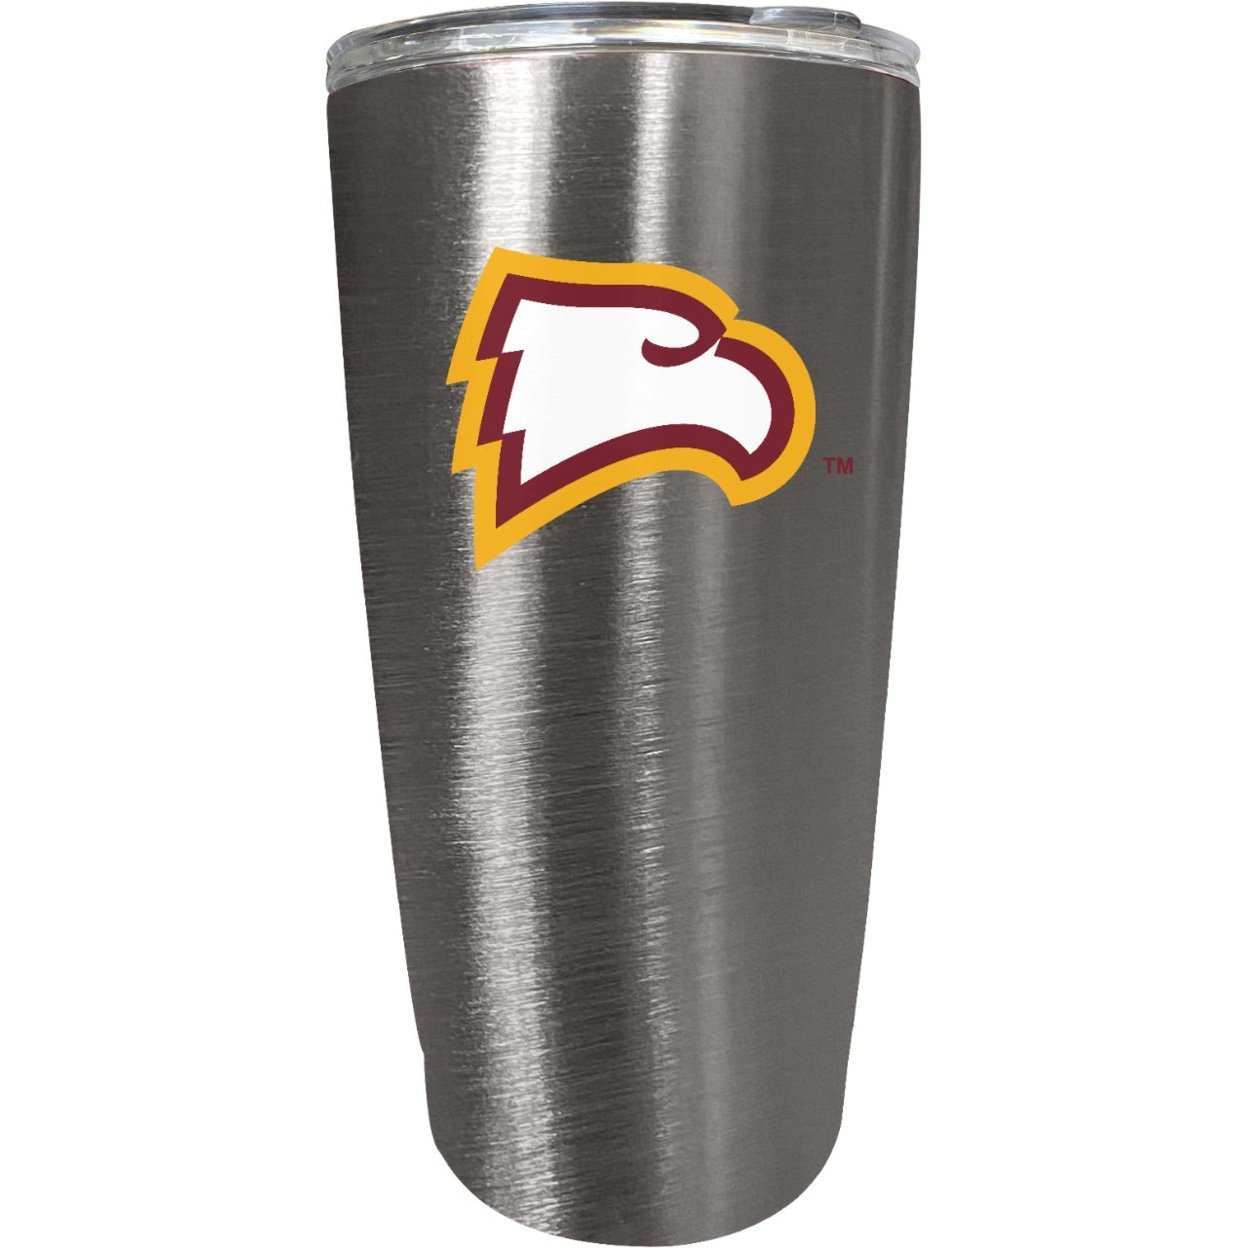 Winthrop University 16 Oz Insulated Stainless Steel Tumbler Colorless